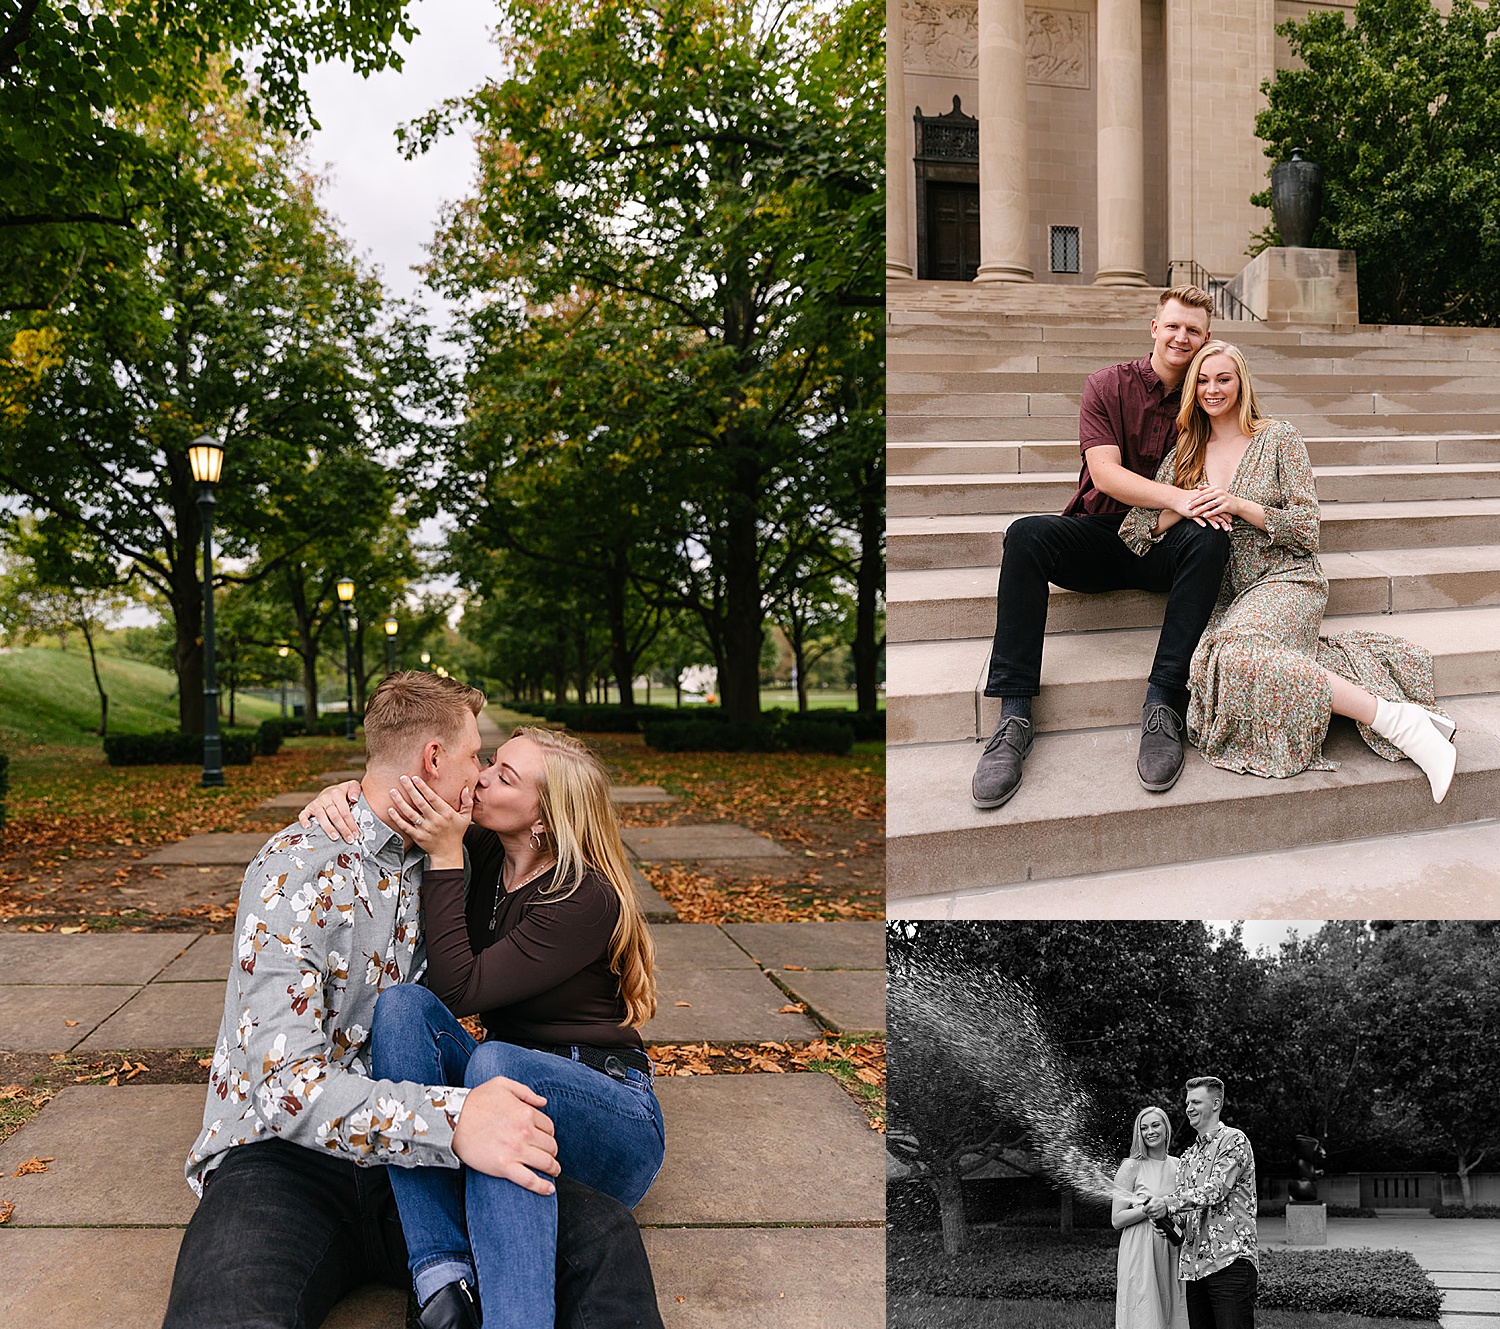 Couple shares kiss on museum walkway while showing off engagement ring.